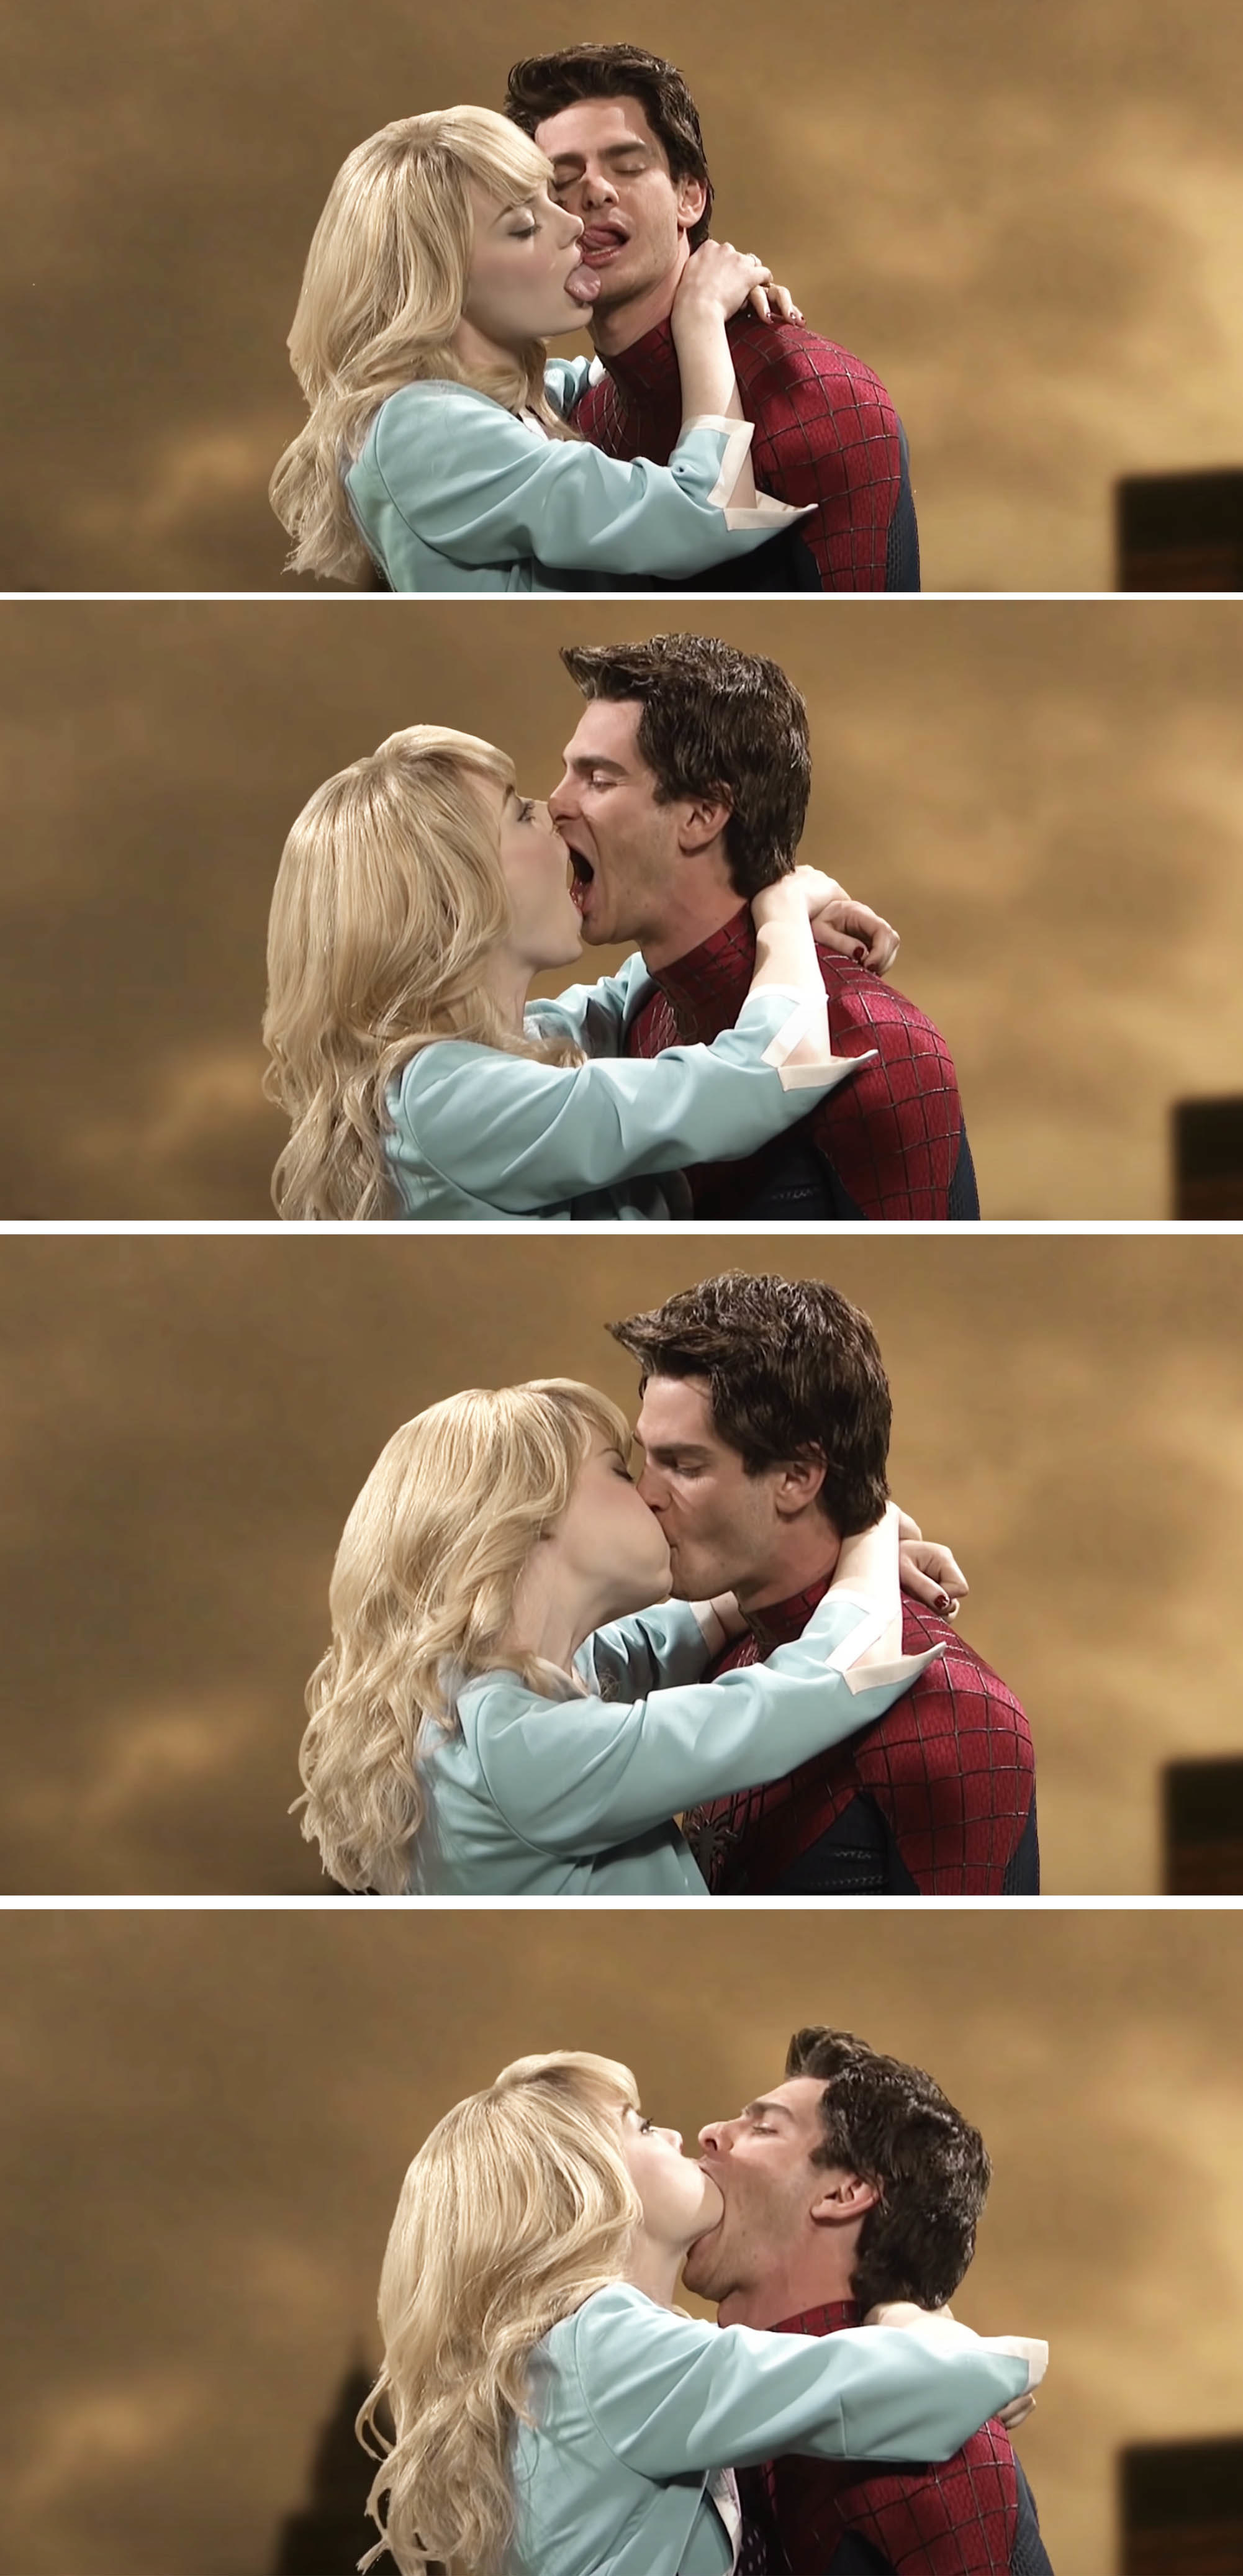 Andrew and Emma making out in various different ways